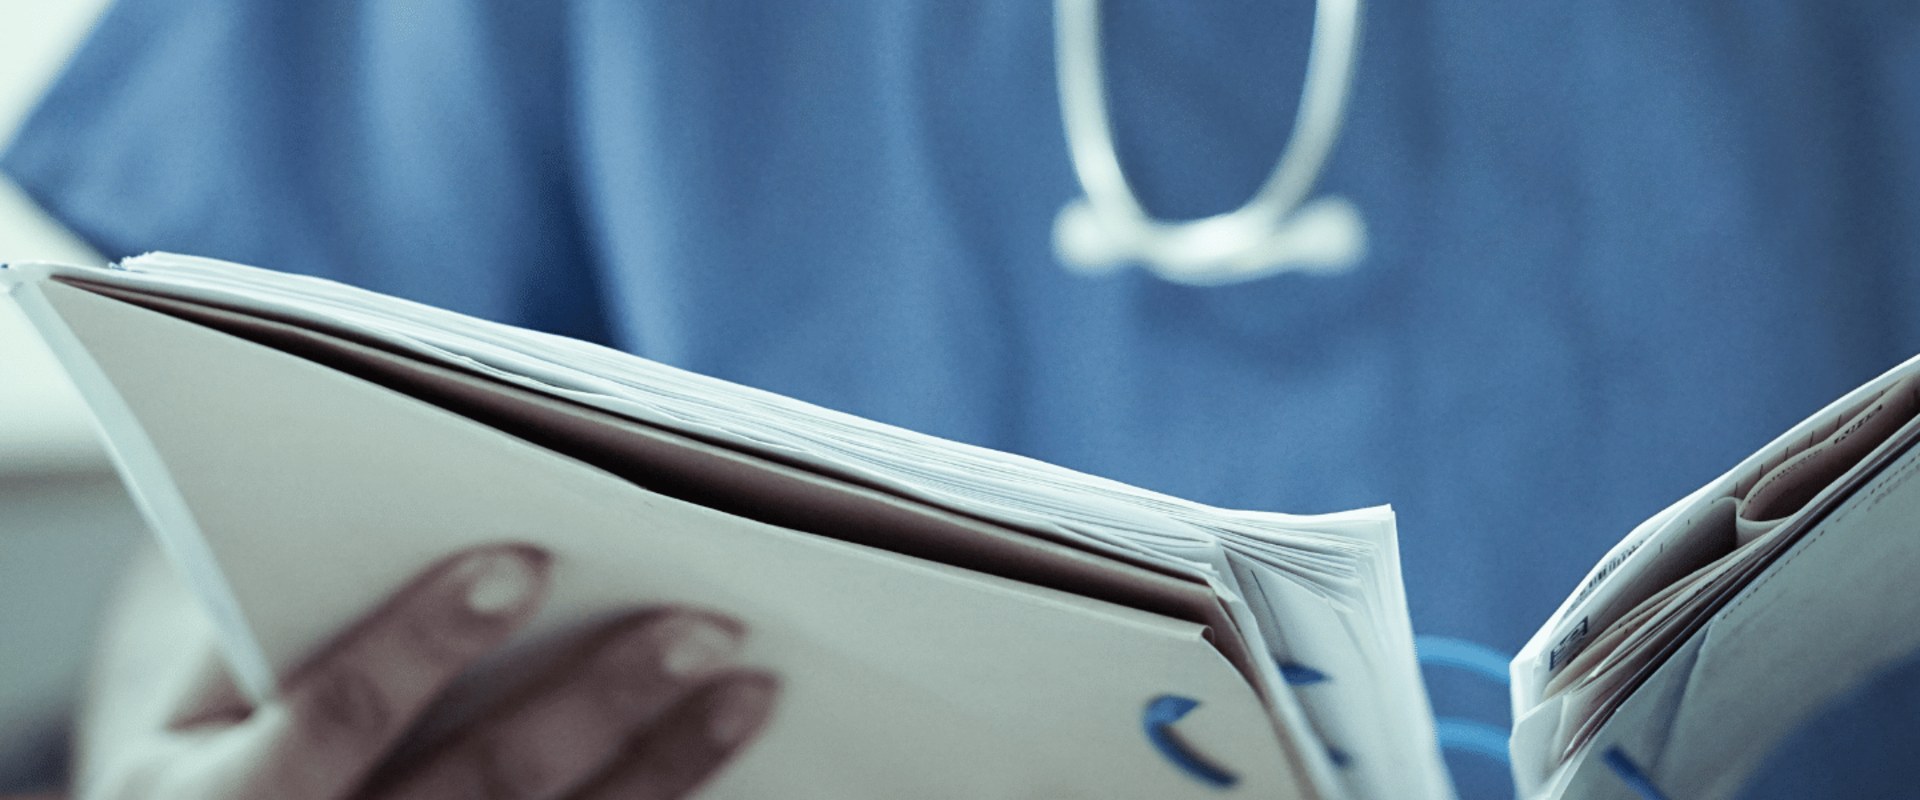 What are three of the most common medical malpractice claims?